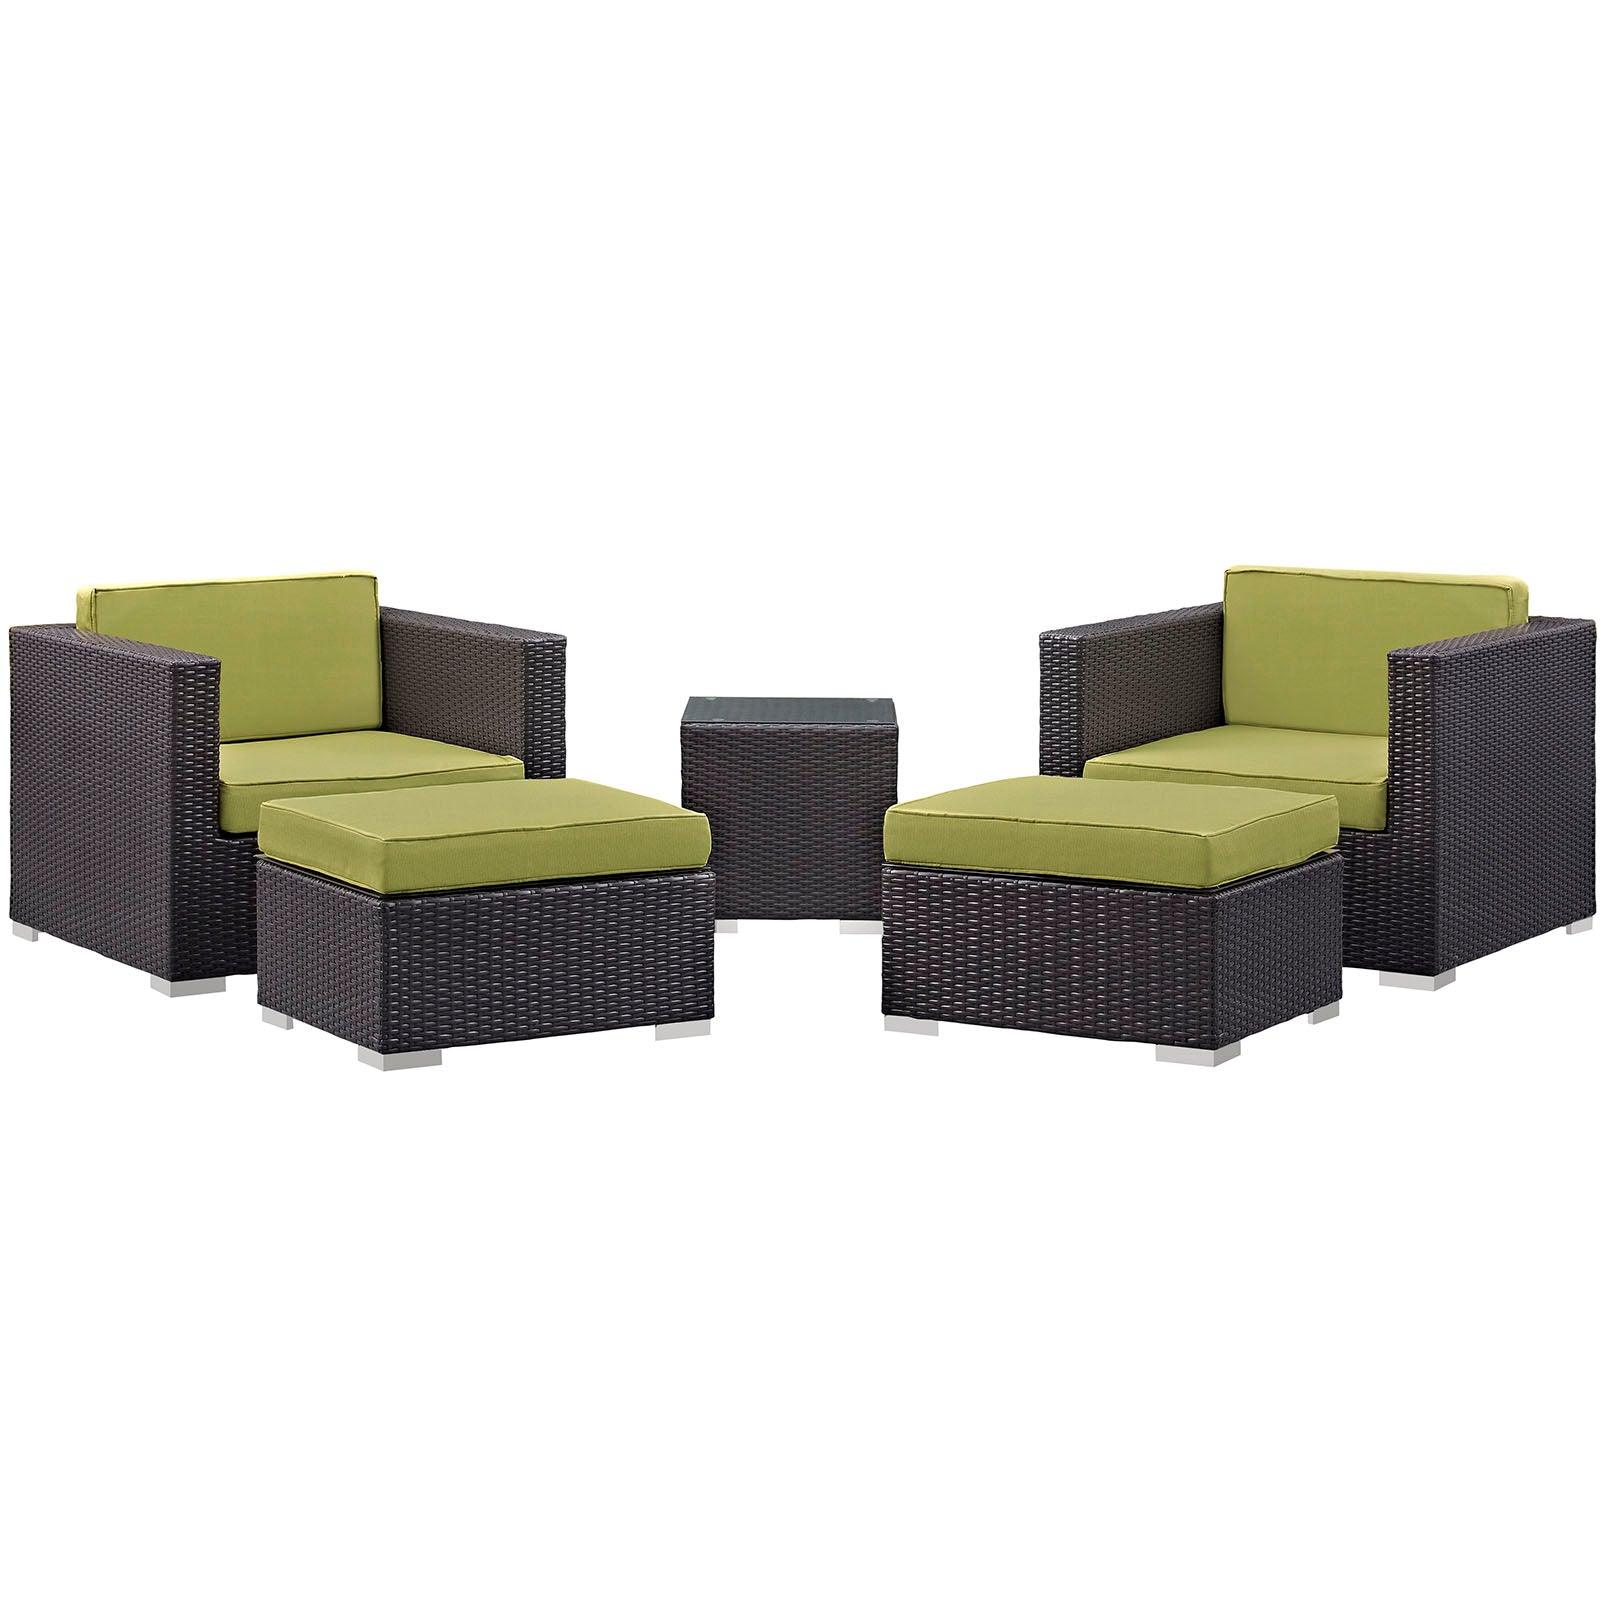 Modway Convene 5 Piece Outdoor Patio Sectional Set FredCo